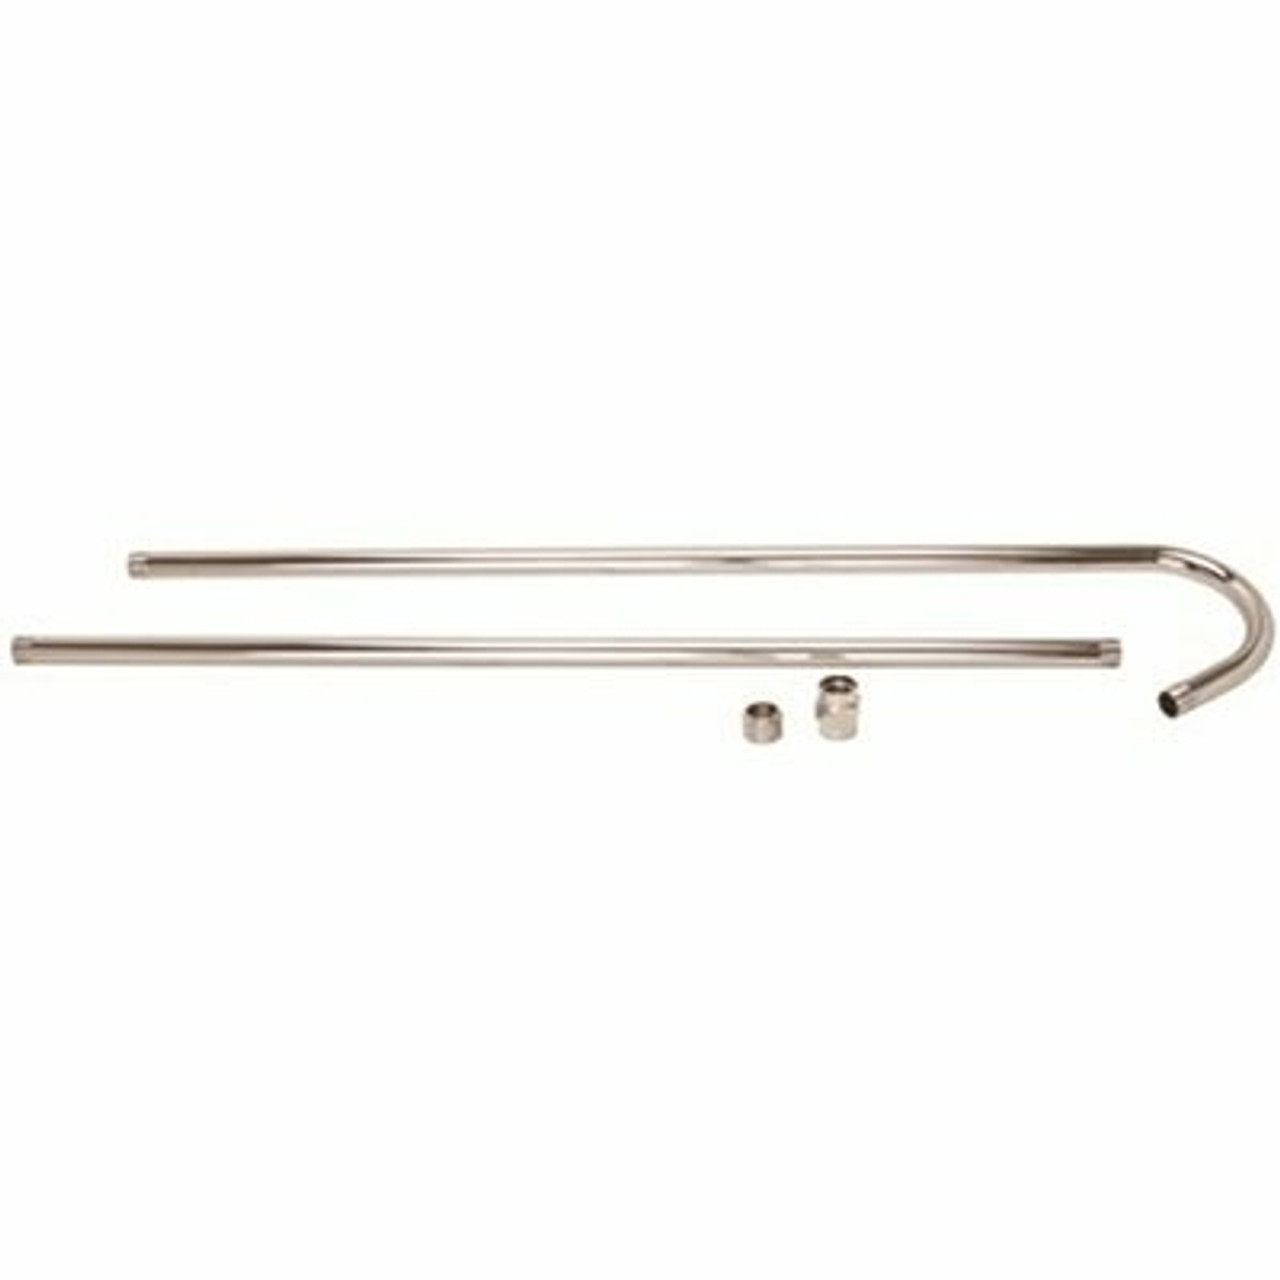 Proplus 1-1/4 In. Riser For Add On Shower, Chrome Plated